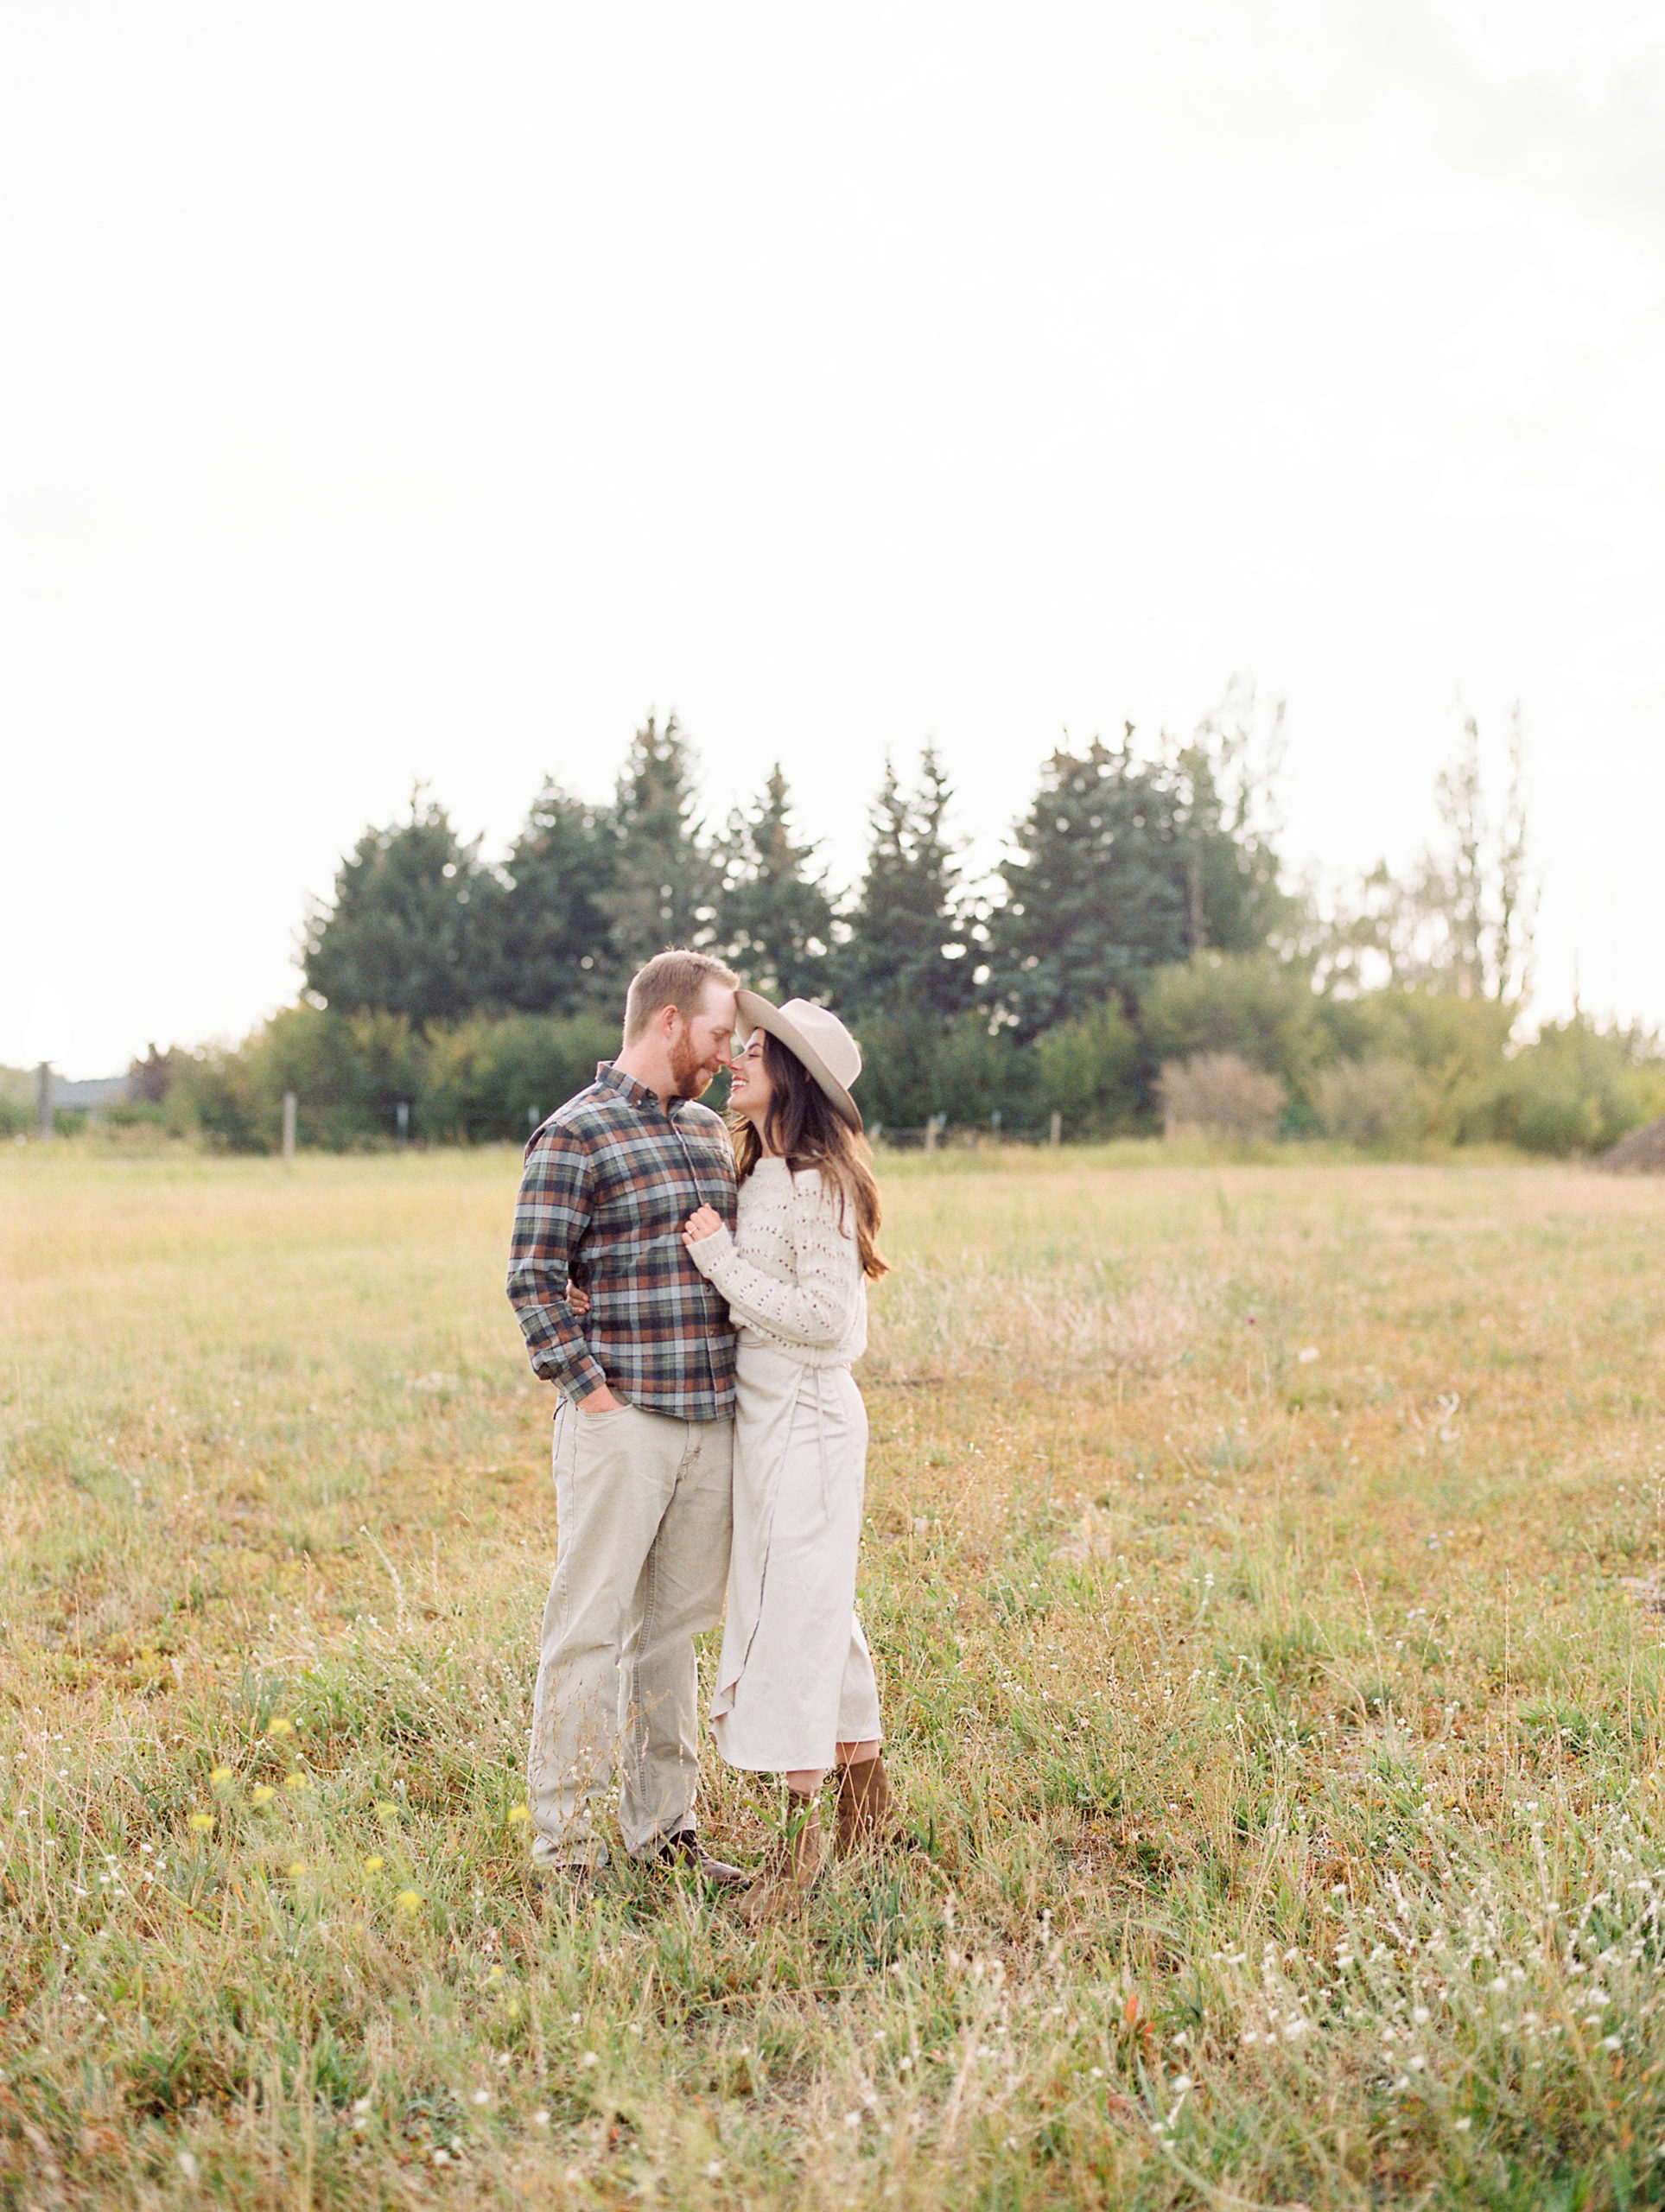 Engagement photos by Keeley Mckay Photography